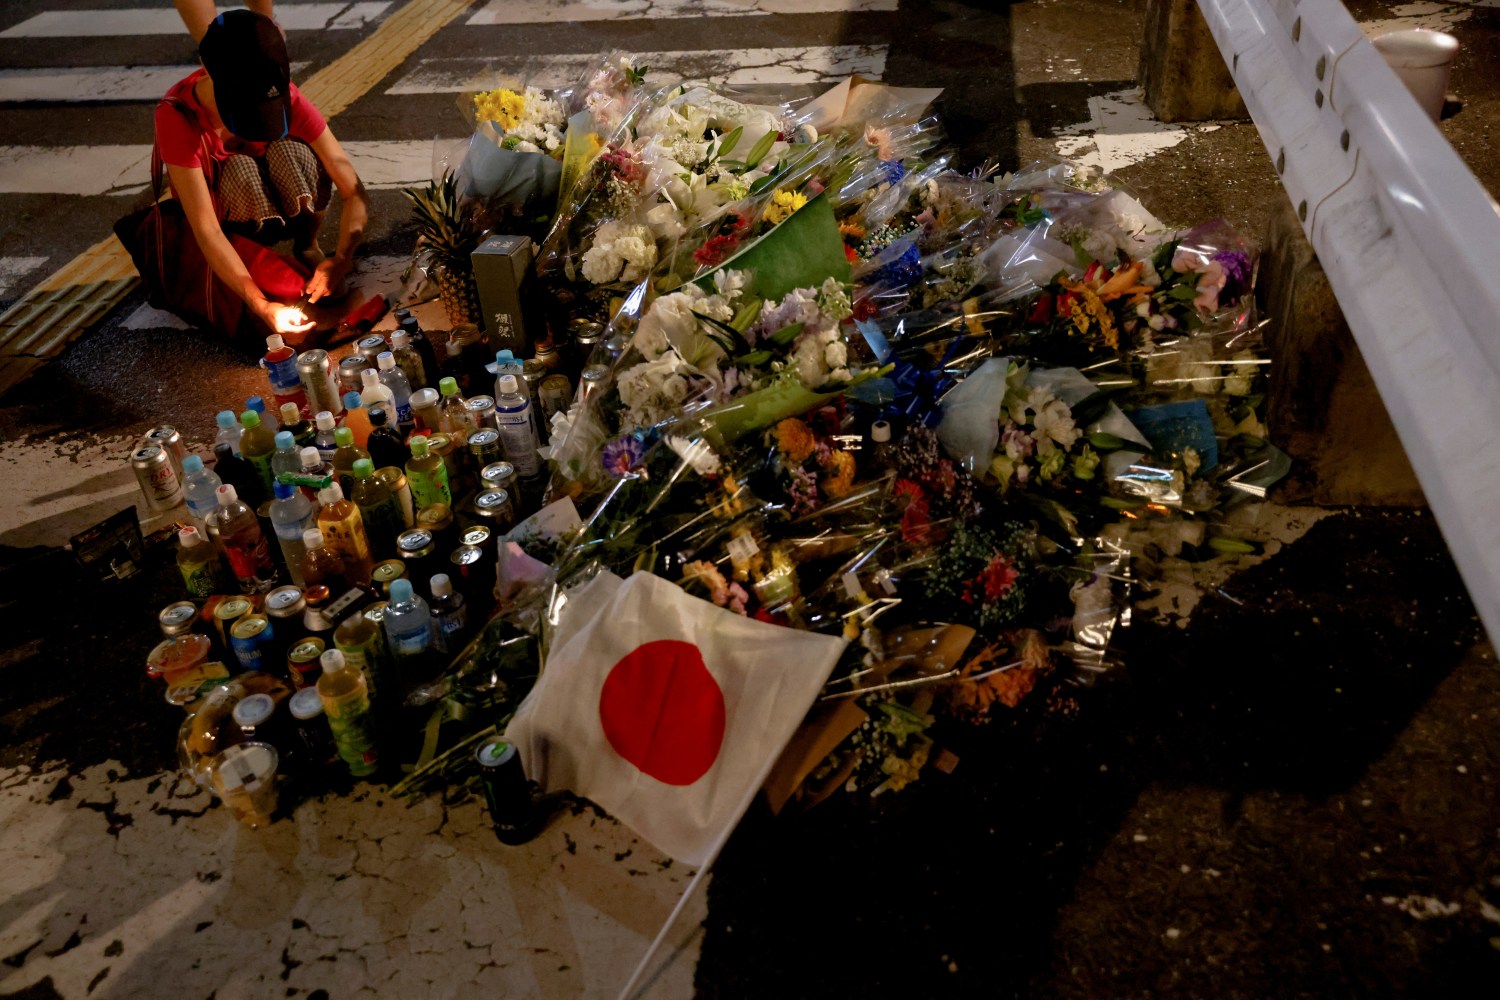 A person pays respects next to tributes laid at the site where late former Japanese Prime Minister Shinzo Abe was shot while campaigning for a parliamentary election, near Yamato-Saidaiji station in Nara, western Japan, July 8, 2022. REUTERS/Issei Kato